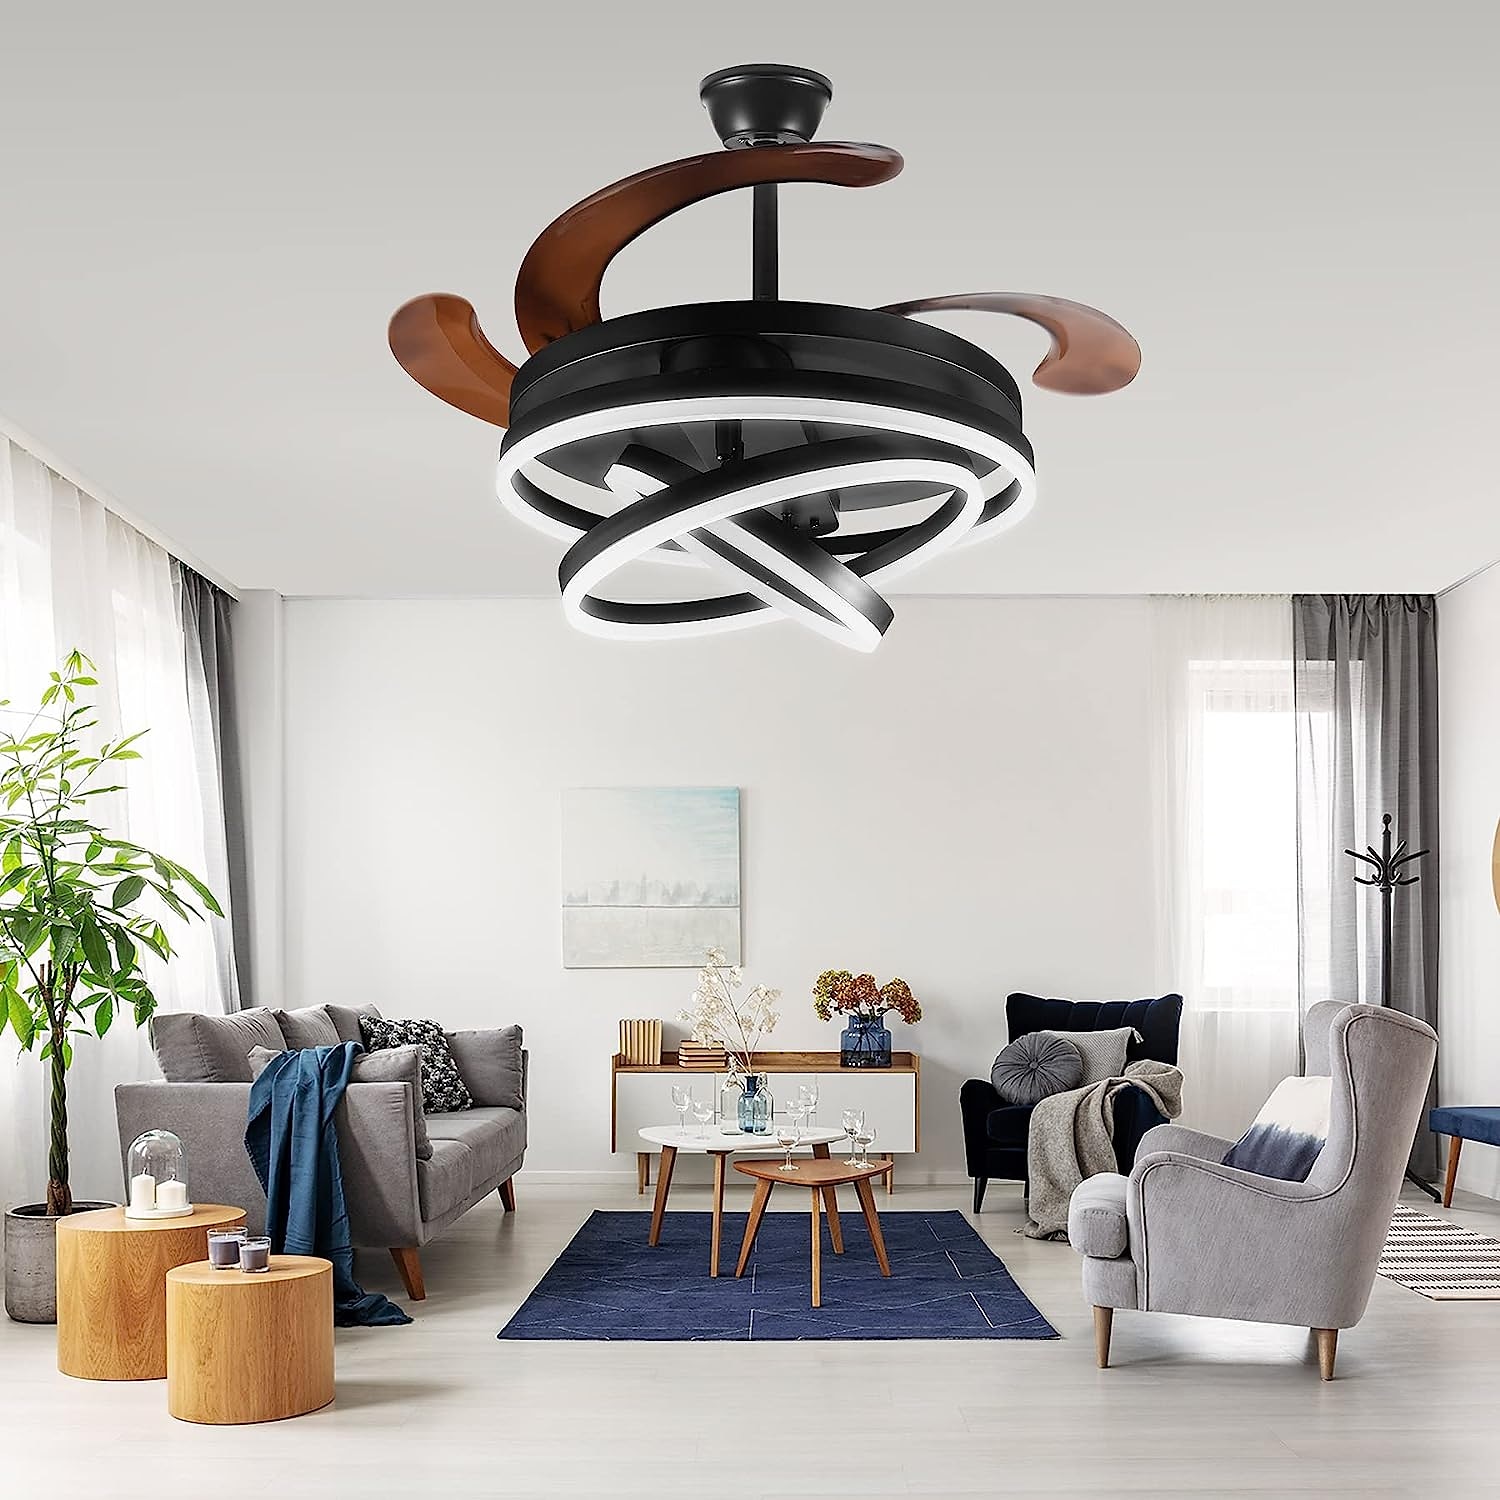 42 Retractable Ceiling Fans With